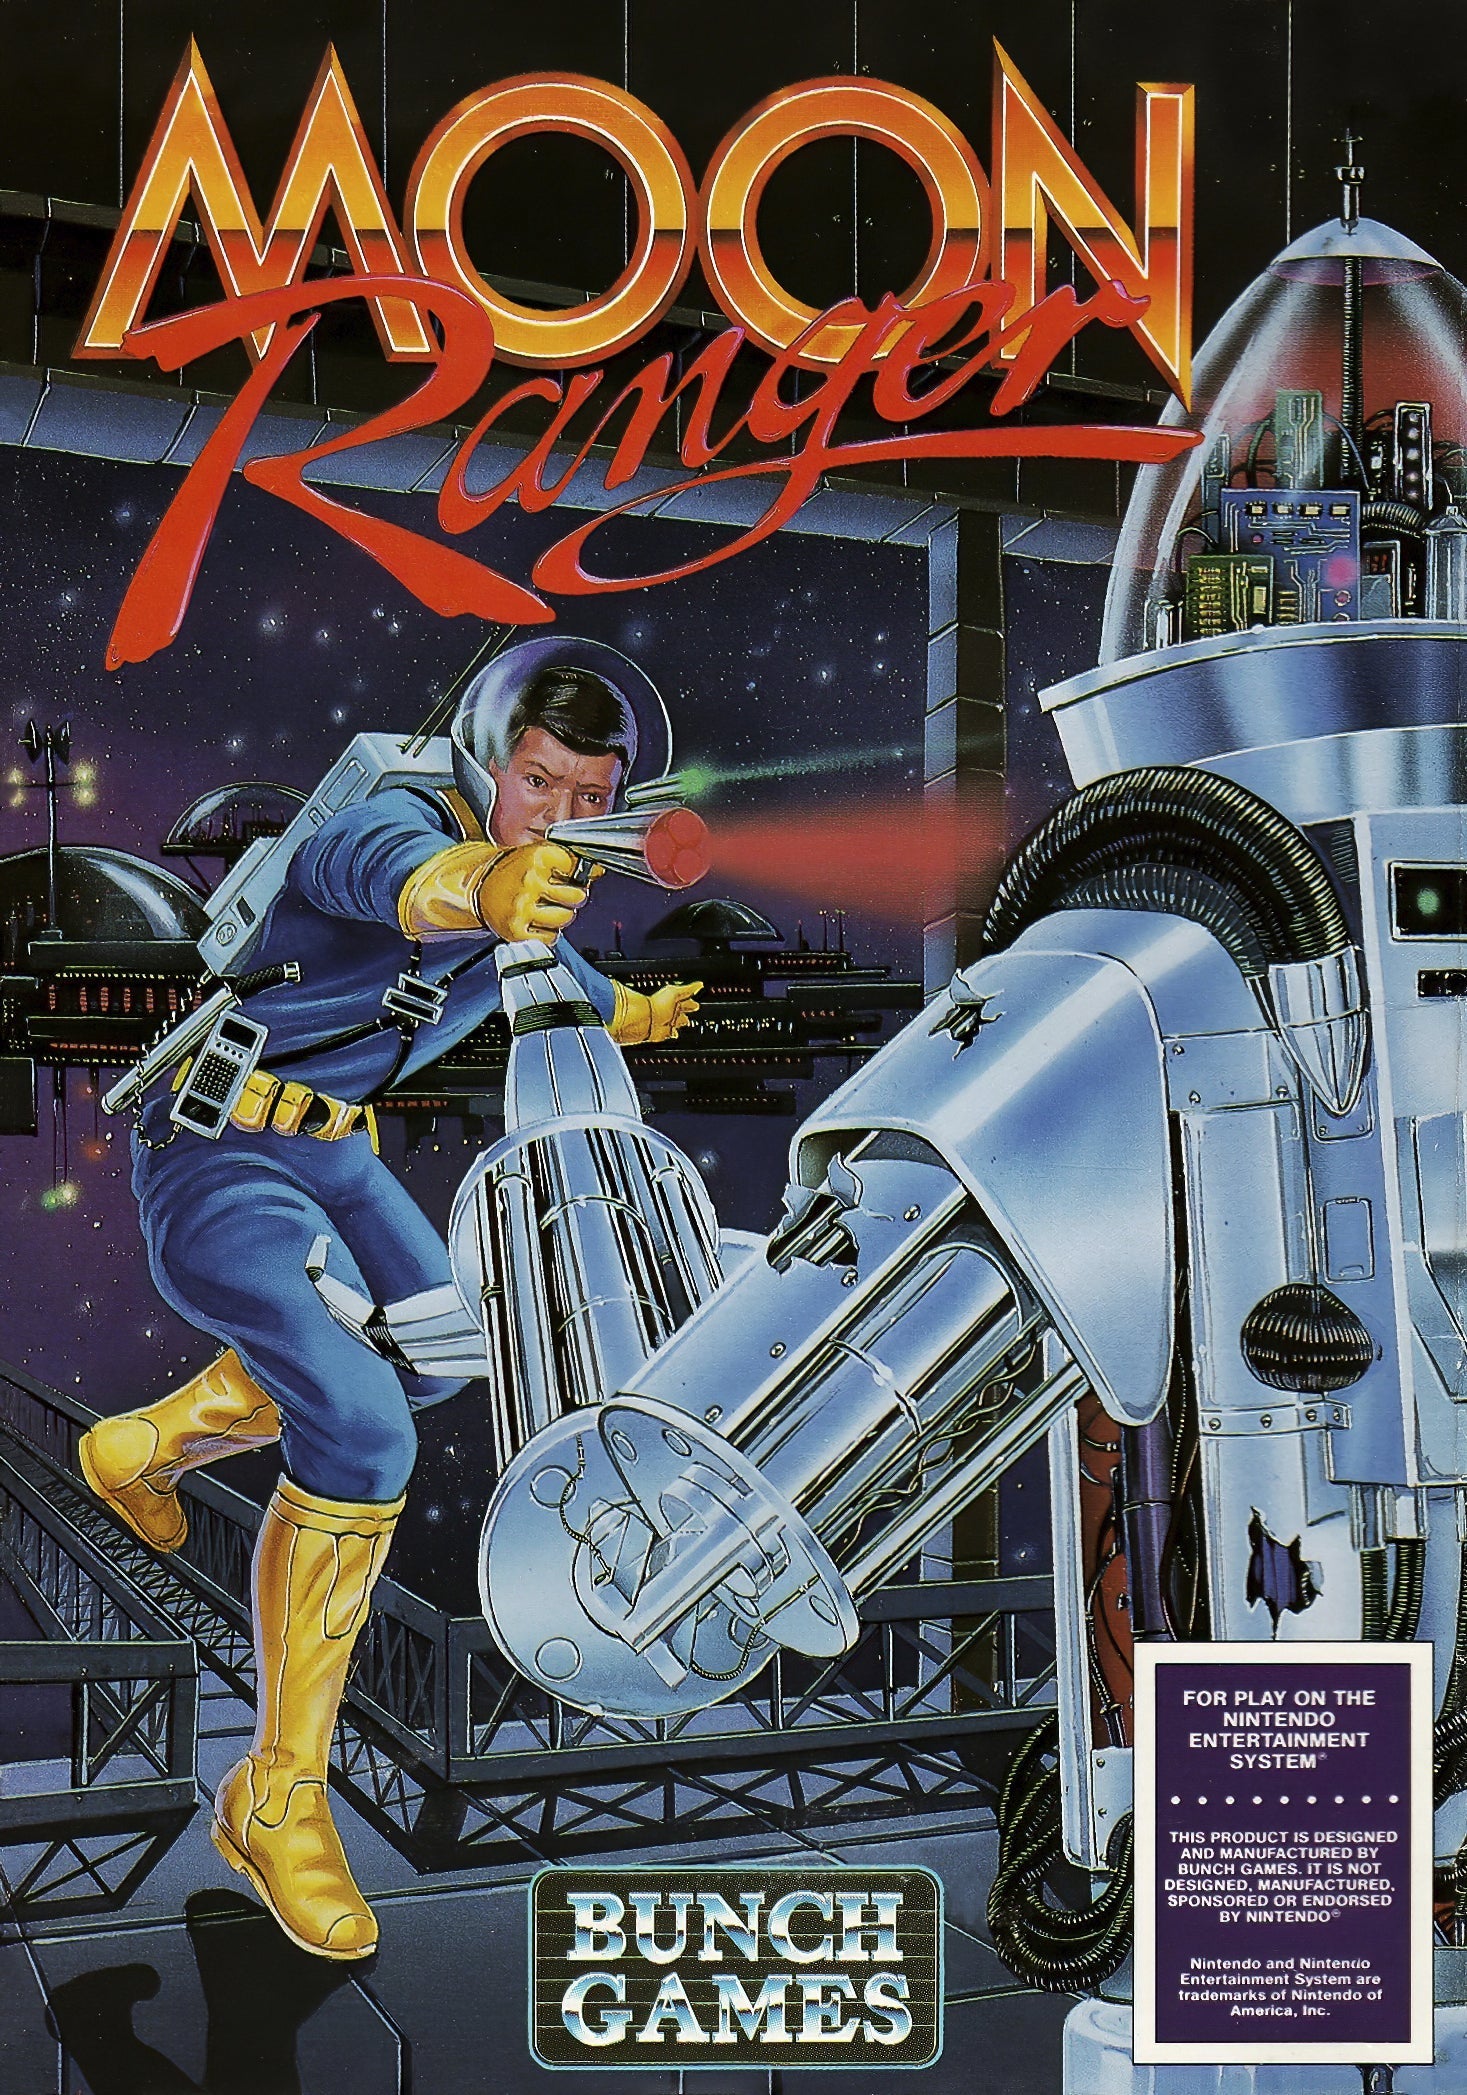 Moon Ranger Cover Art and Product Photo